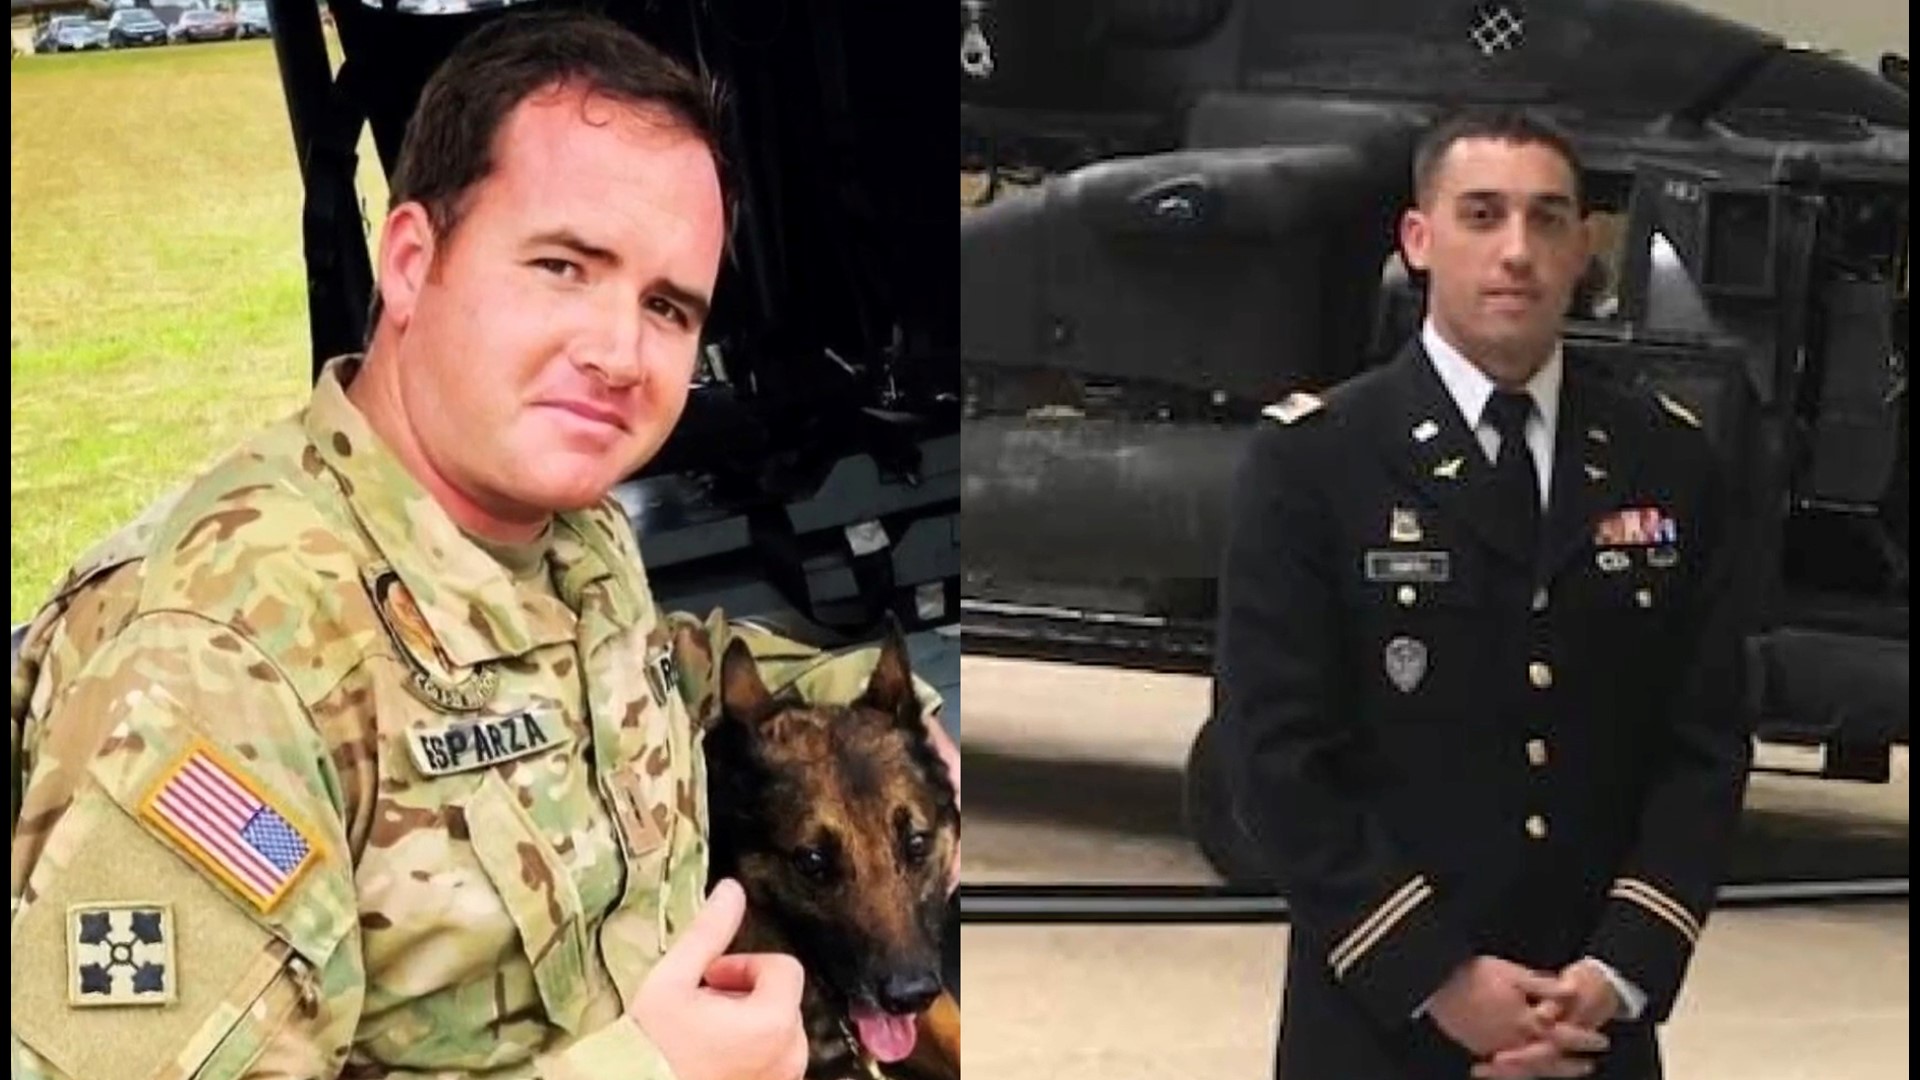 Zachary Esparza grew up in St. Louis, and Rusten Smith was from Rolla. There were among nine who died during a training exercise last month in Kentucky.